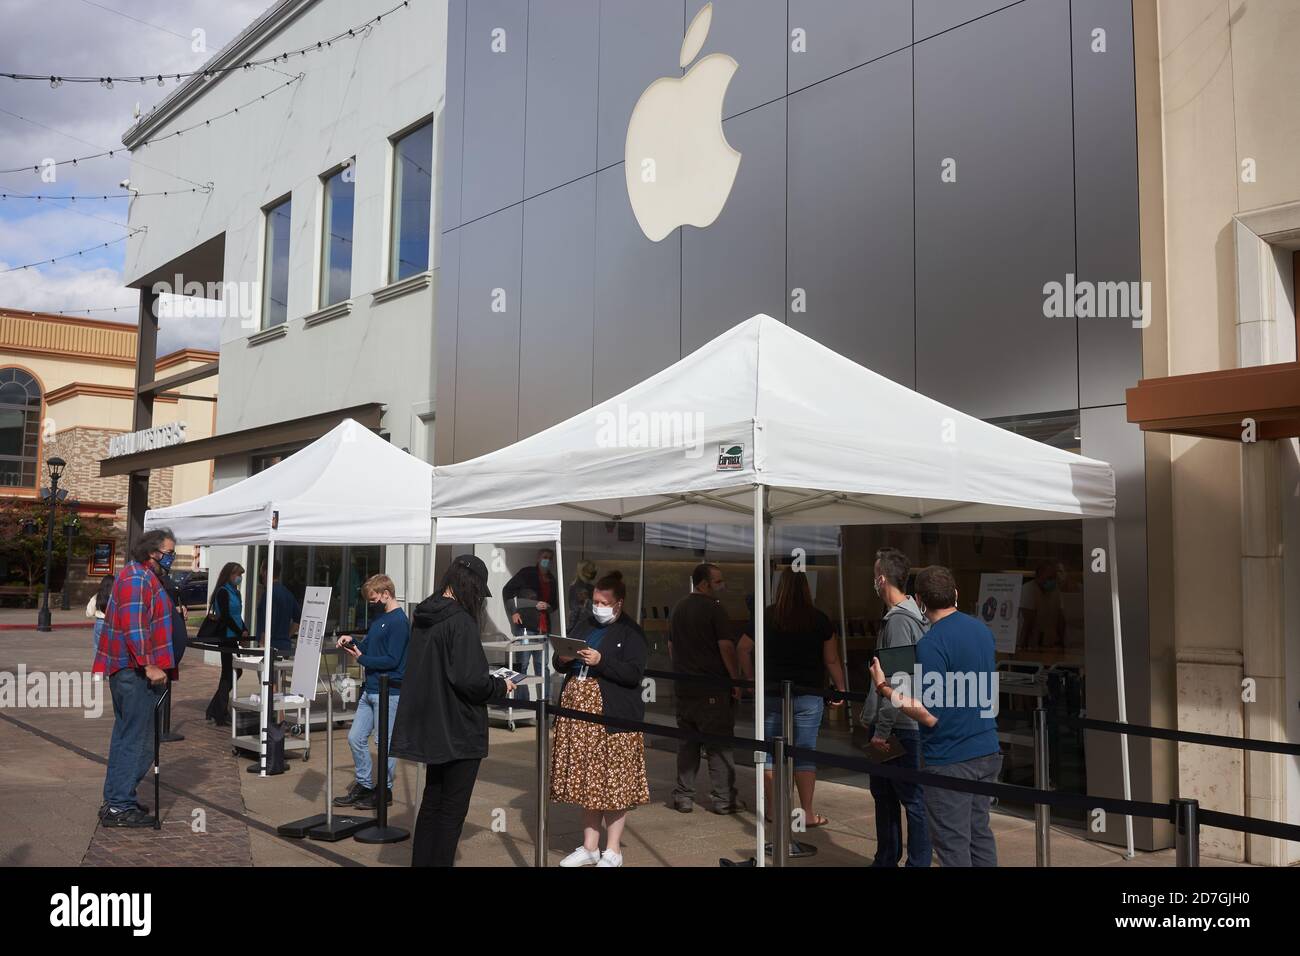 Shoppers check in before entering the Apple store in Tigard, Oregon, during a pandemic fall season. The new iPhone 12 is to be released on Friday. Stock Photo